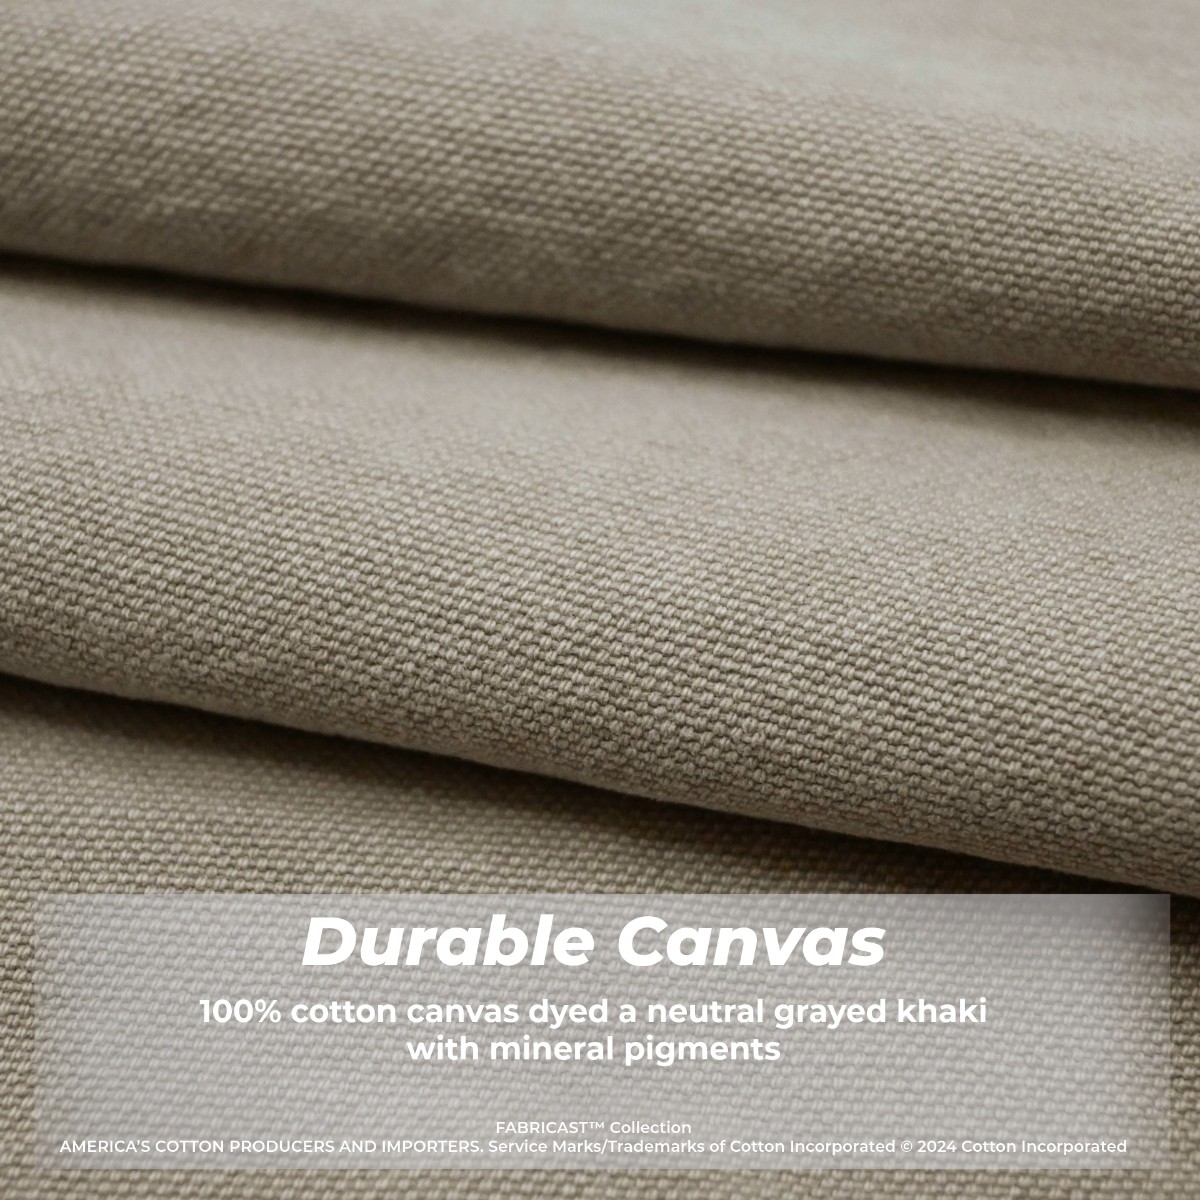 This 100% #cotton canvas was dyed a neutral grayed khaki with mineral pigments. These naturally sourced pigments offer very good light and wash fastness properties on this durable fabric. #FabricFriday @cotton_works cottonworks.com/en/fabricast/7…